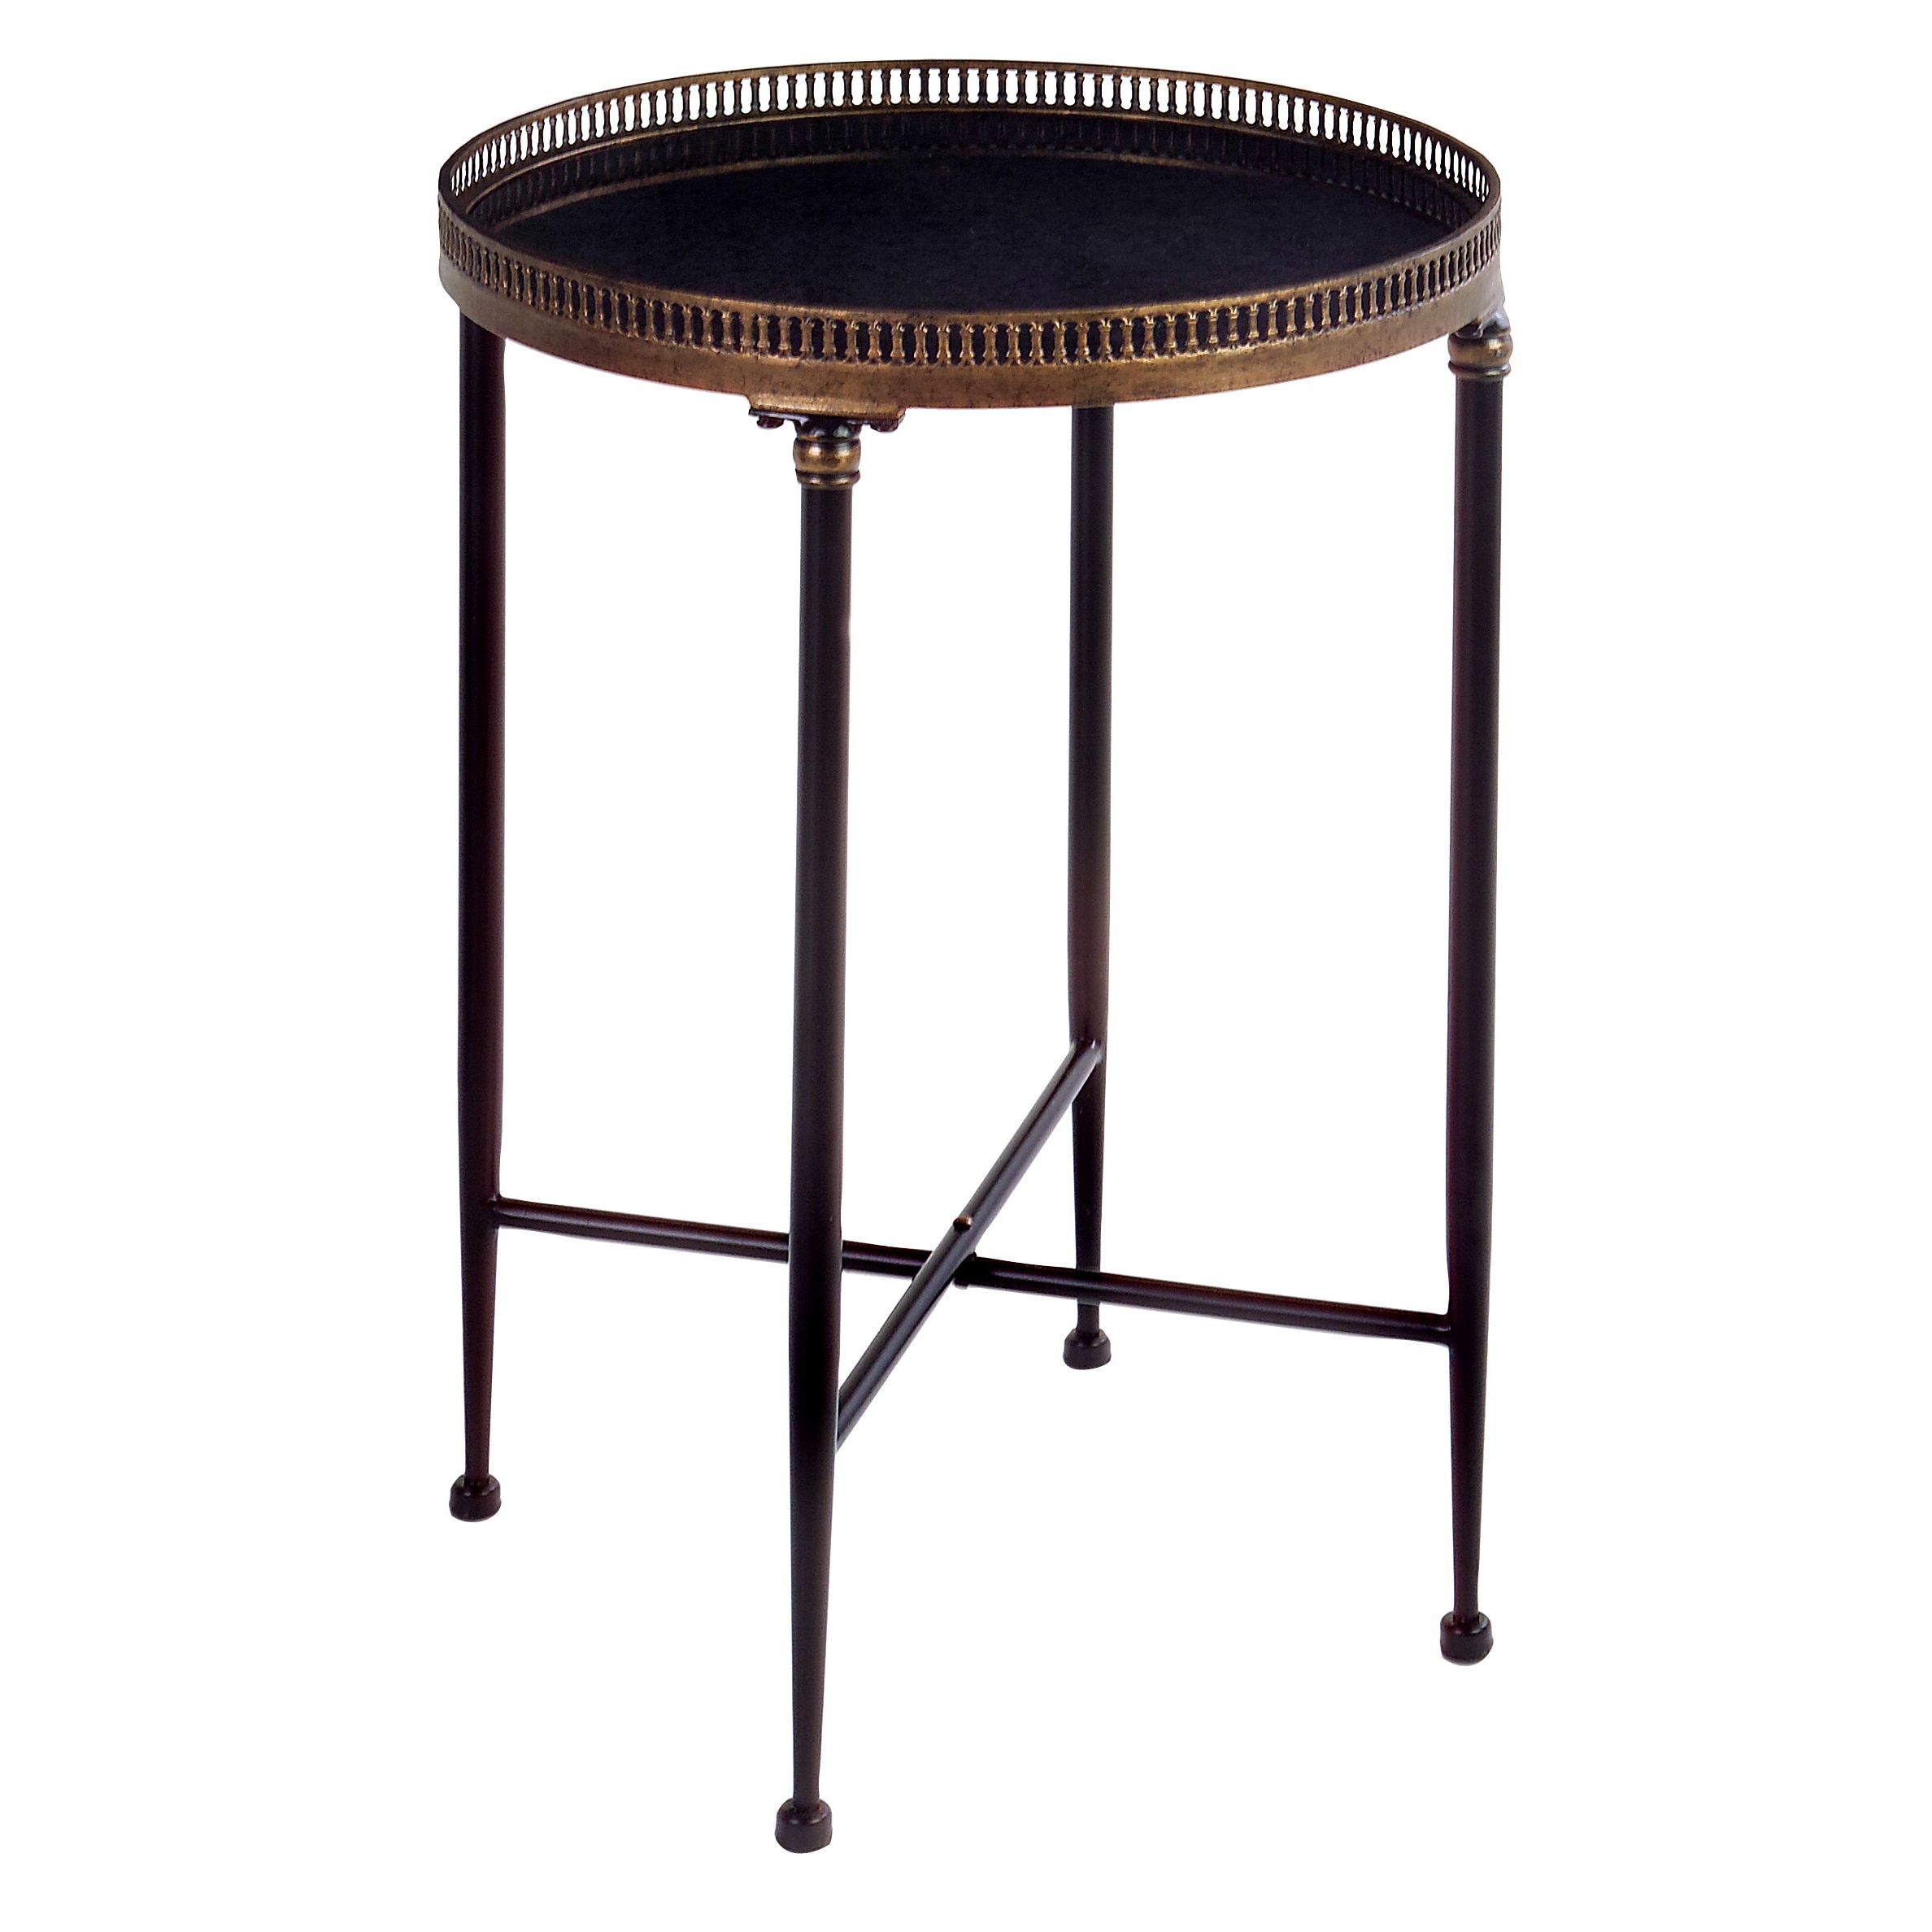 benzara blavk iron marble round accent table black copper metal tiny furniture west elm dining room drawer pulls and knobs white gloss nest tables target tall cantilever umbrella